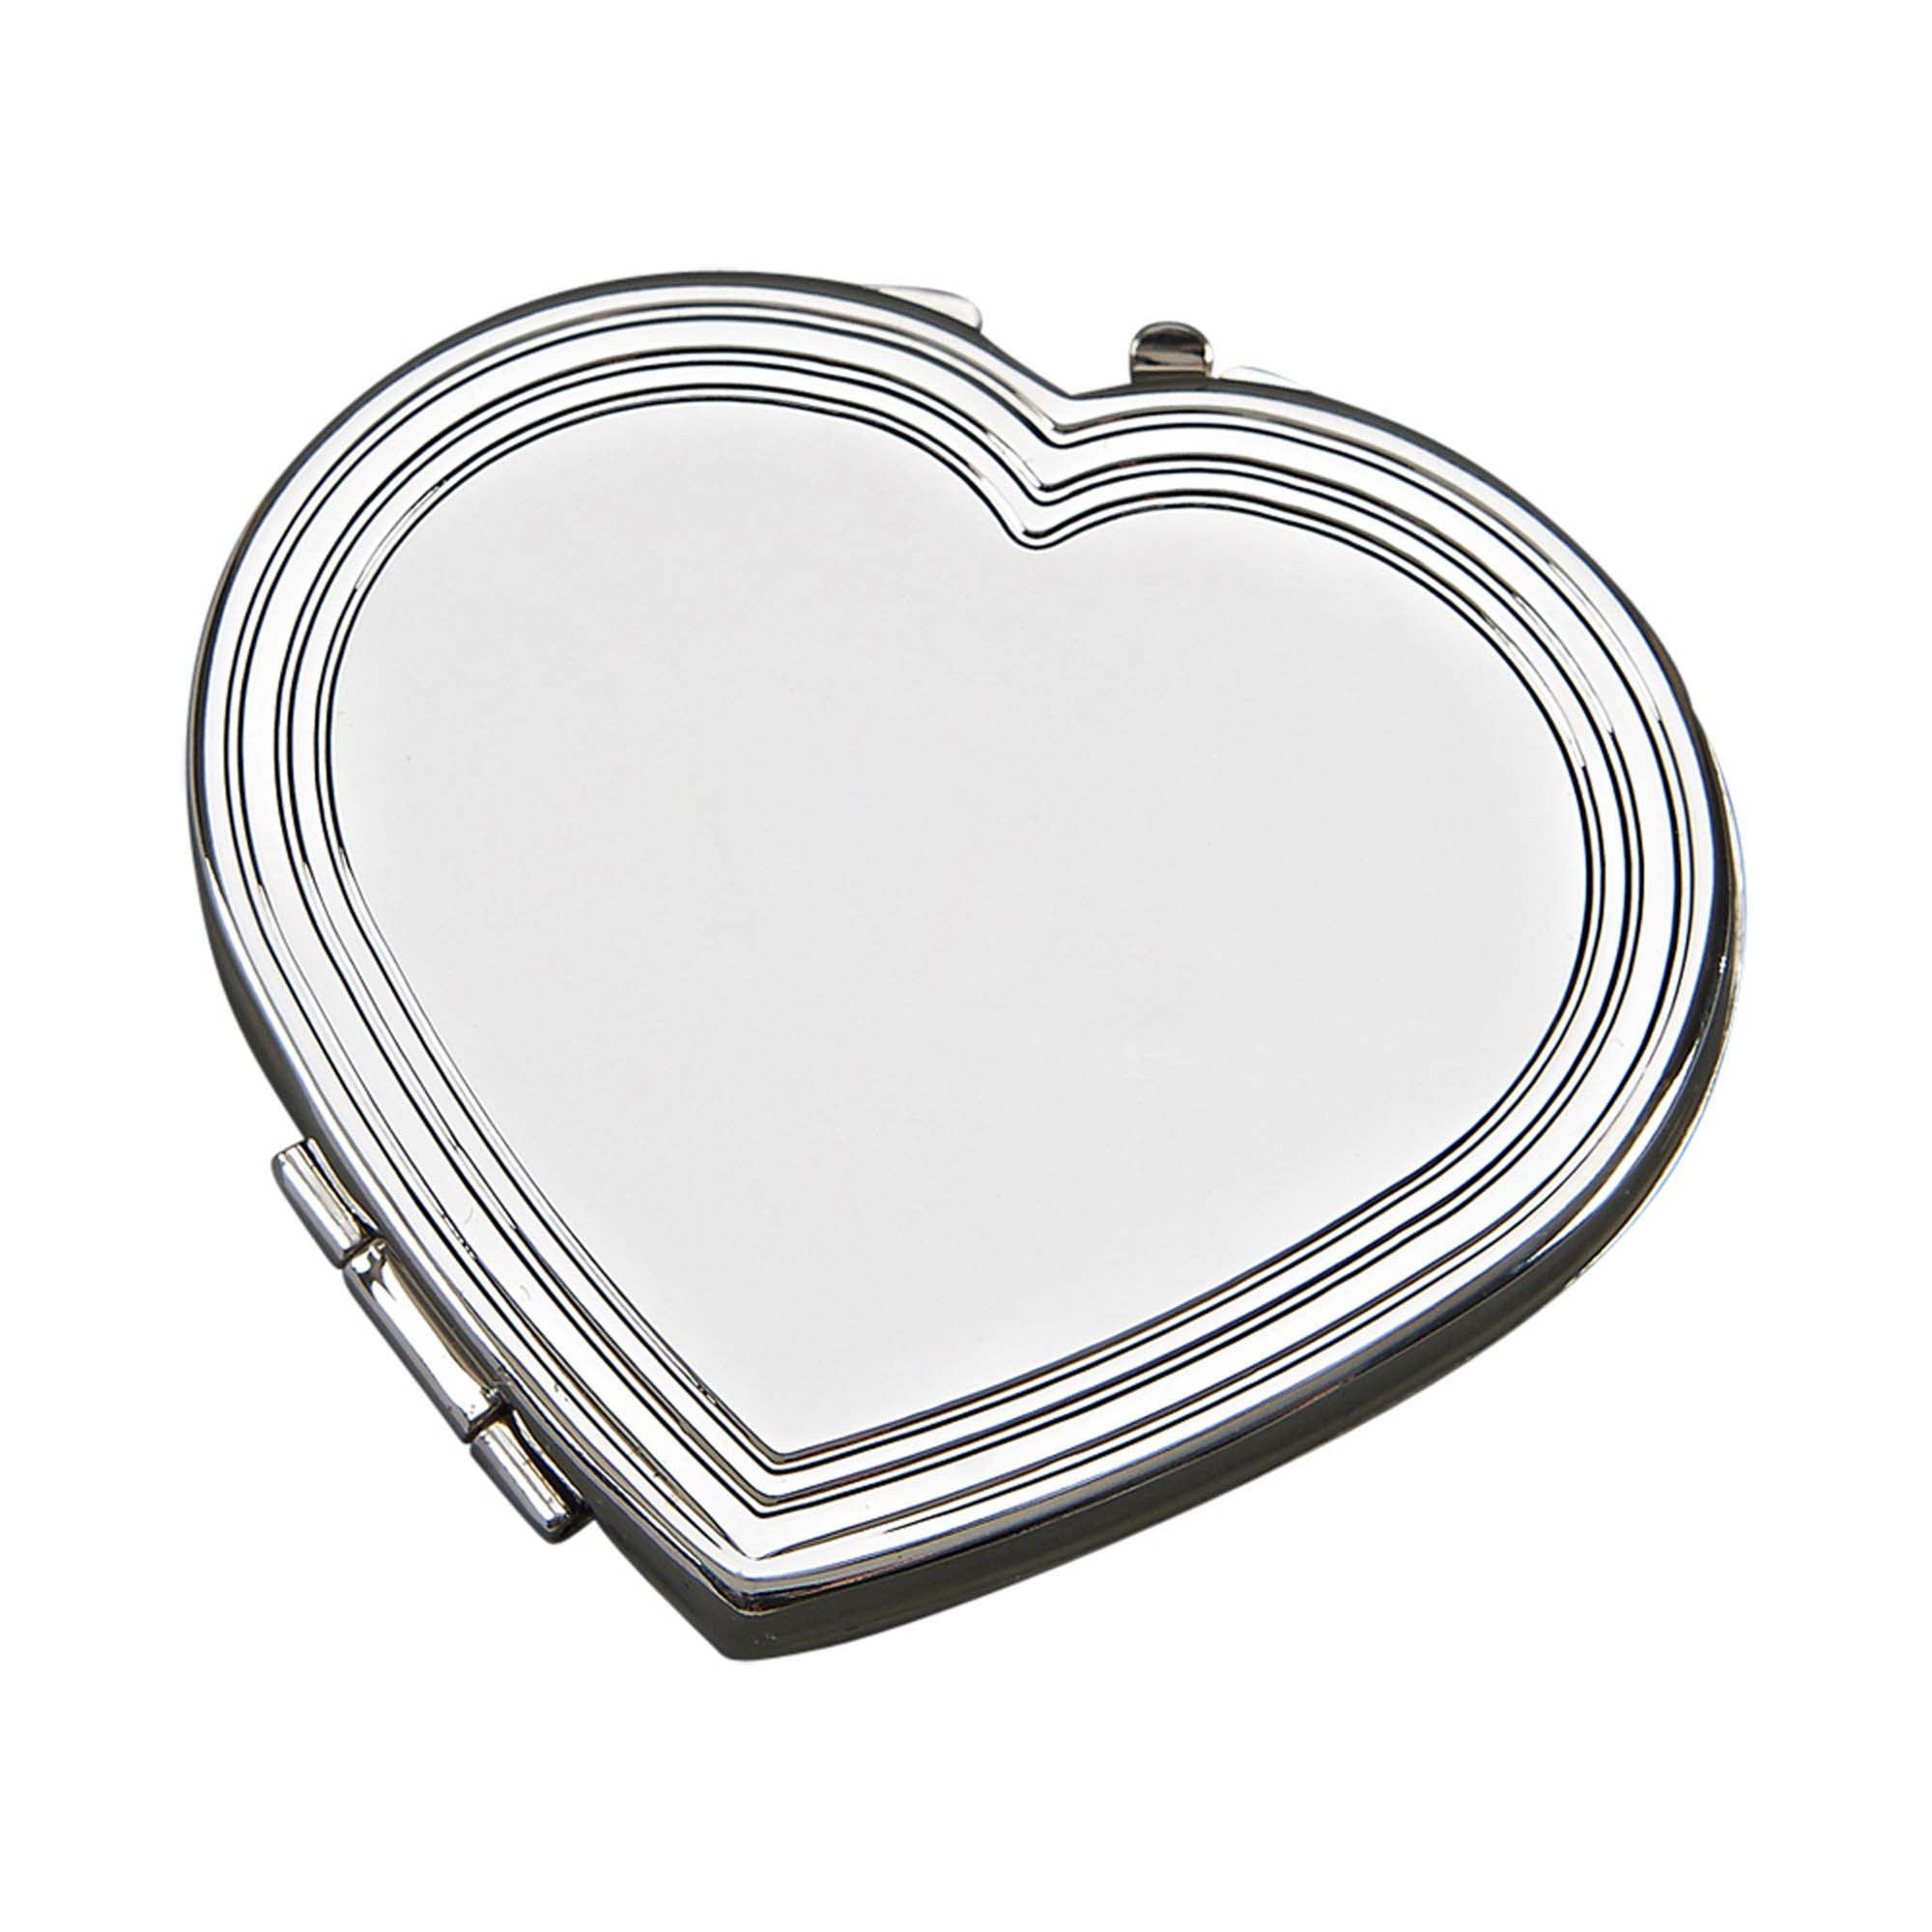 002950 2.25 X 2 In. Silhouette Heart Compact, Nickel Plated - Silver